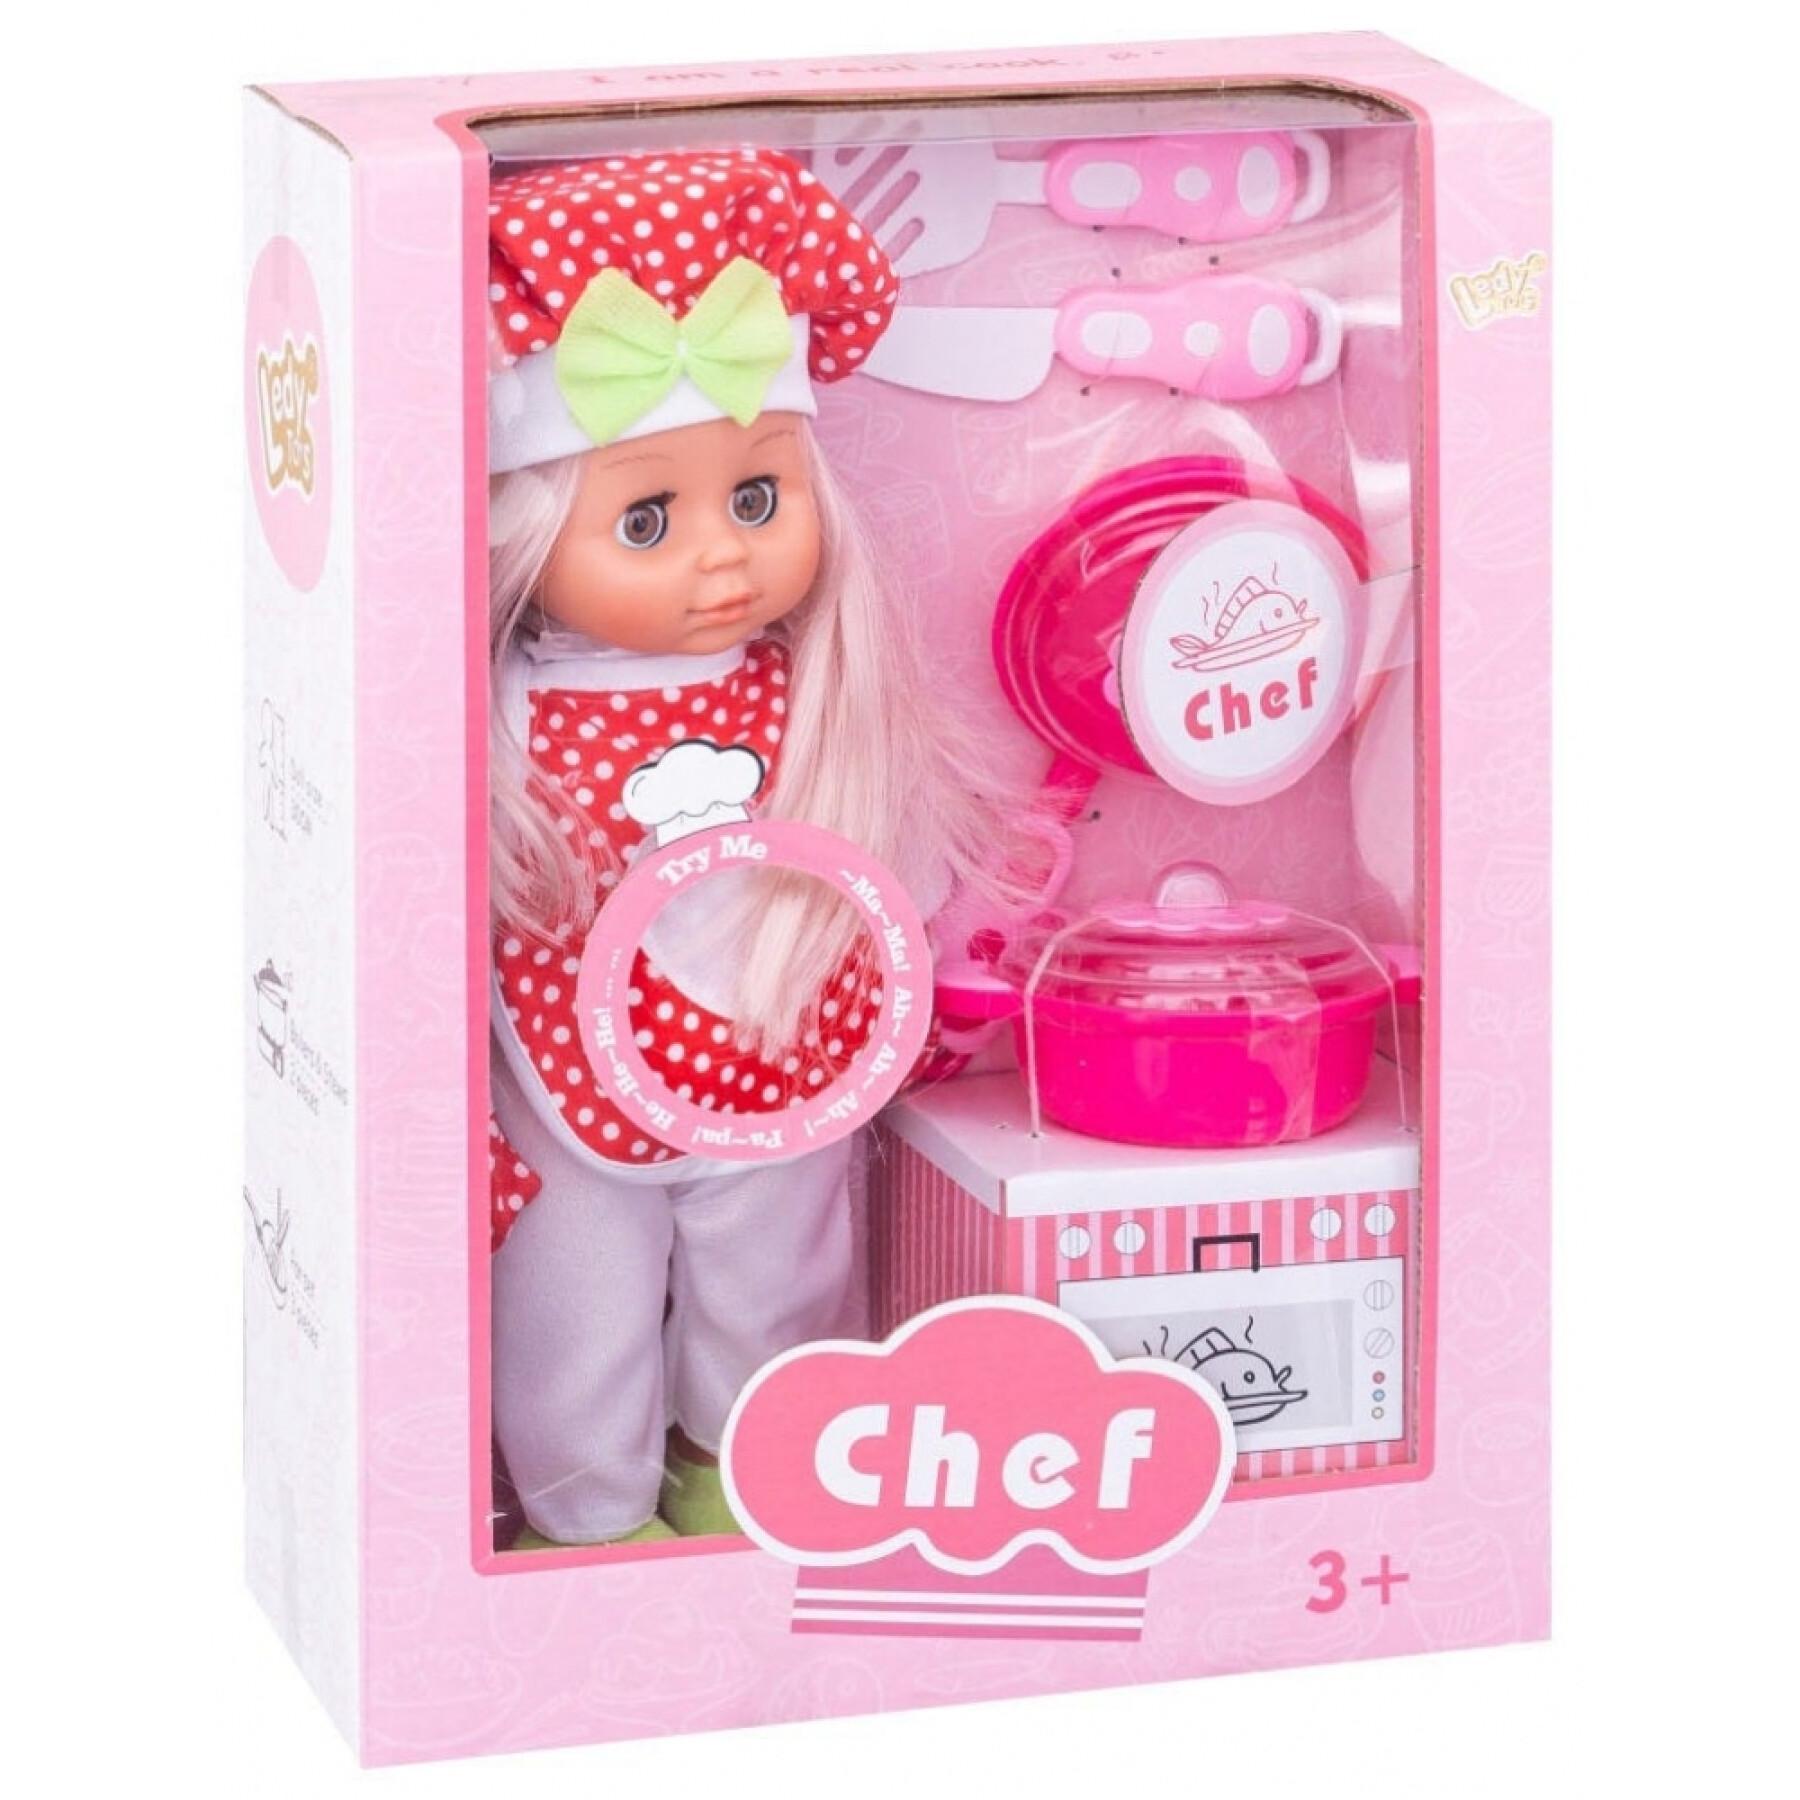 Baking doll with 12 sounds Ledy Toys